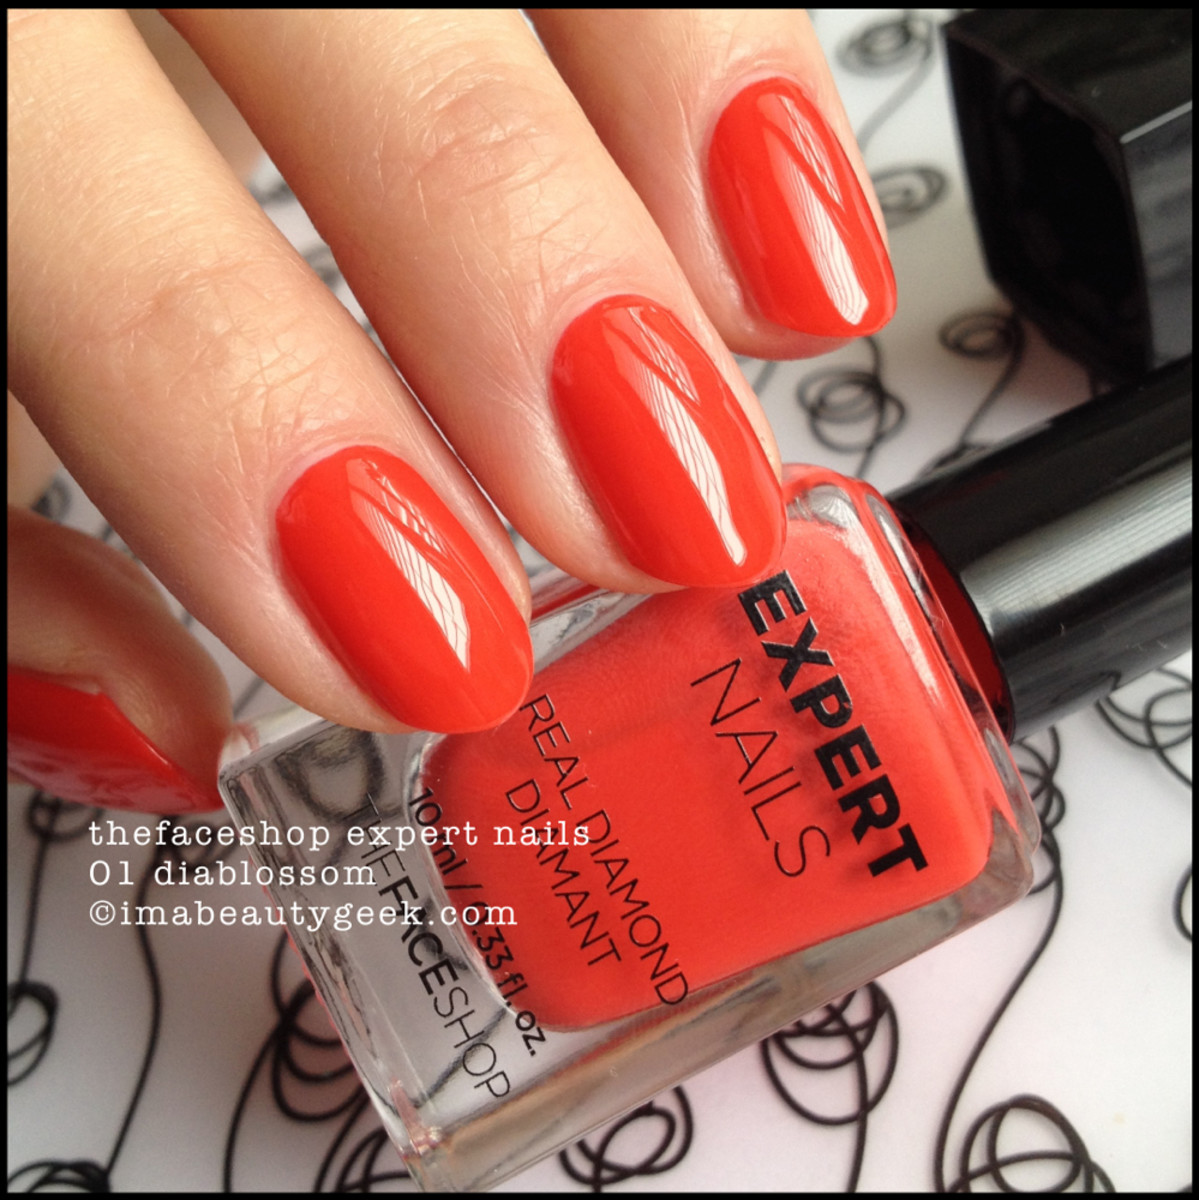 TheFaceShop Expert Nails 01 Diablossom Swatch